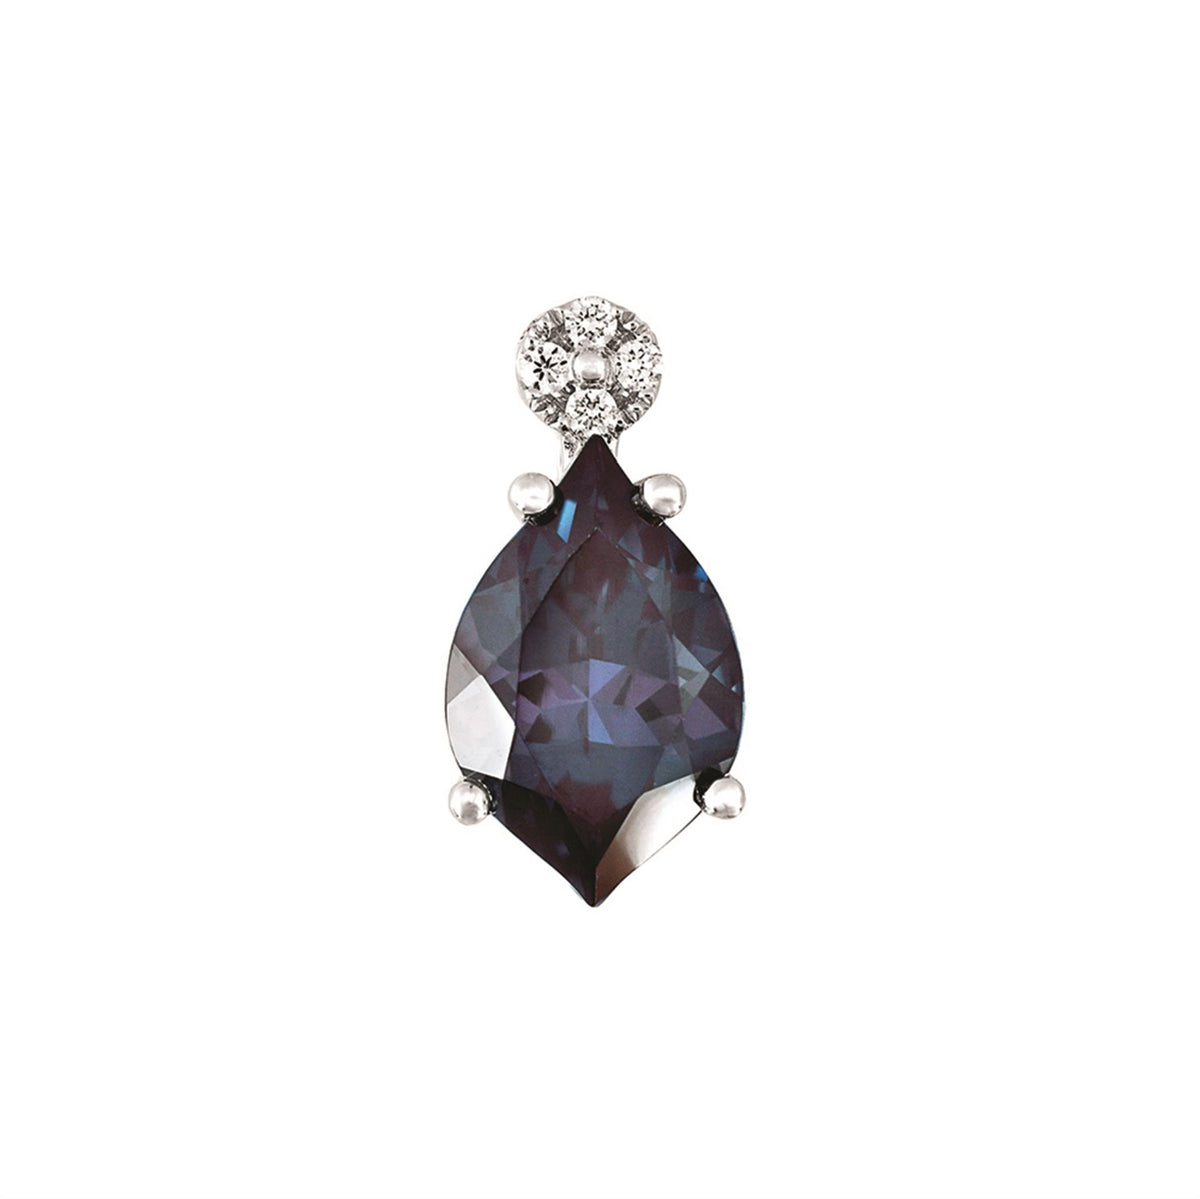 14Kt White Gold Pendant with 2.02ct Chatham Created Alexandrite